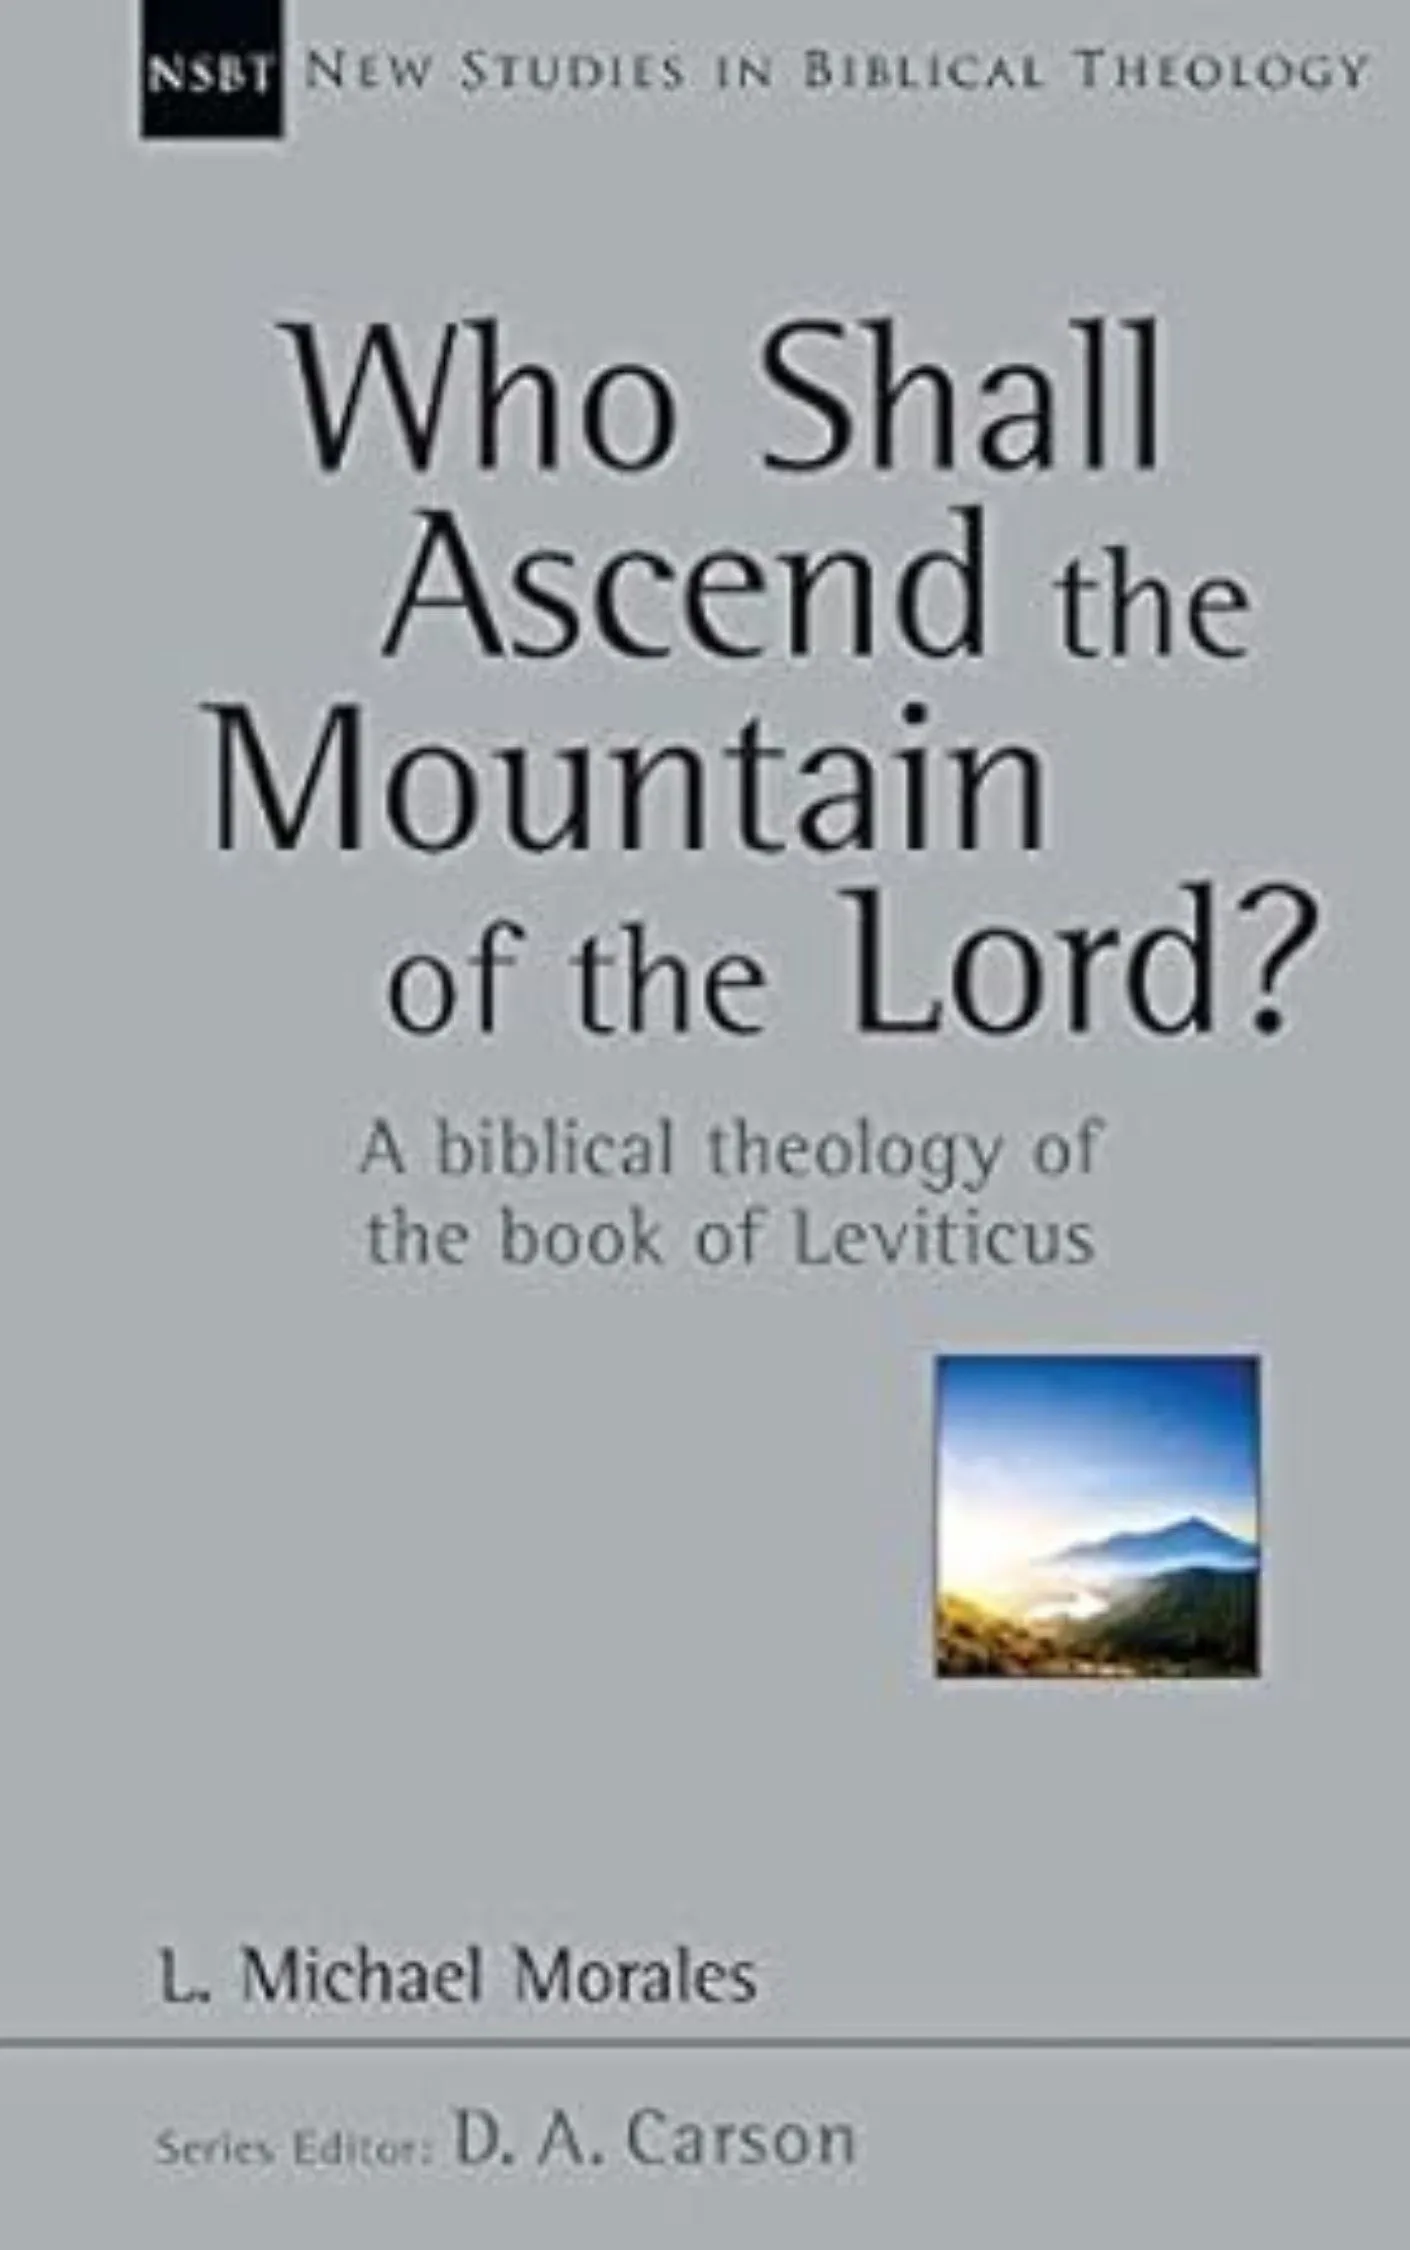 Who Shall Ascend the Mountain of the Lord? A Biblical Theology of the Book of Leviticus by L. Michael Morales